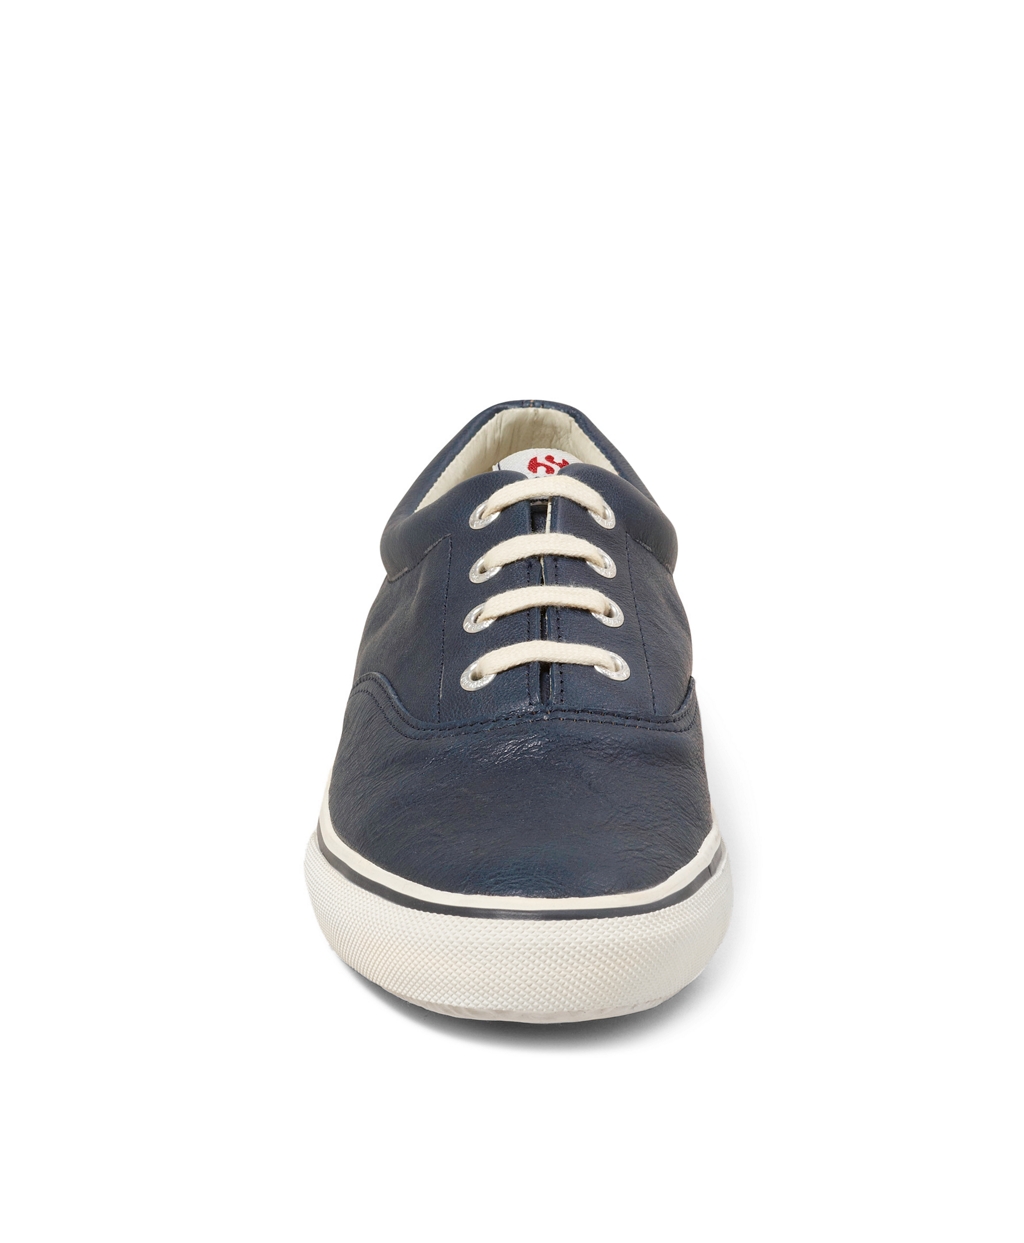 Lyst - Brooks Brothers Superga® Leather Sneakers in Blue for Men